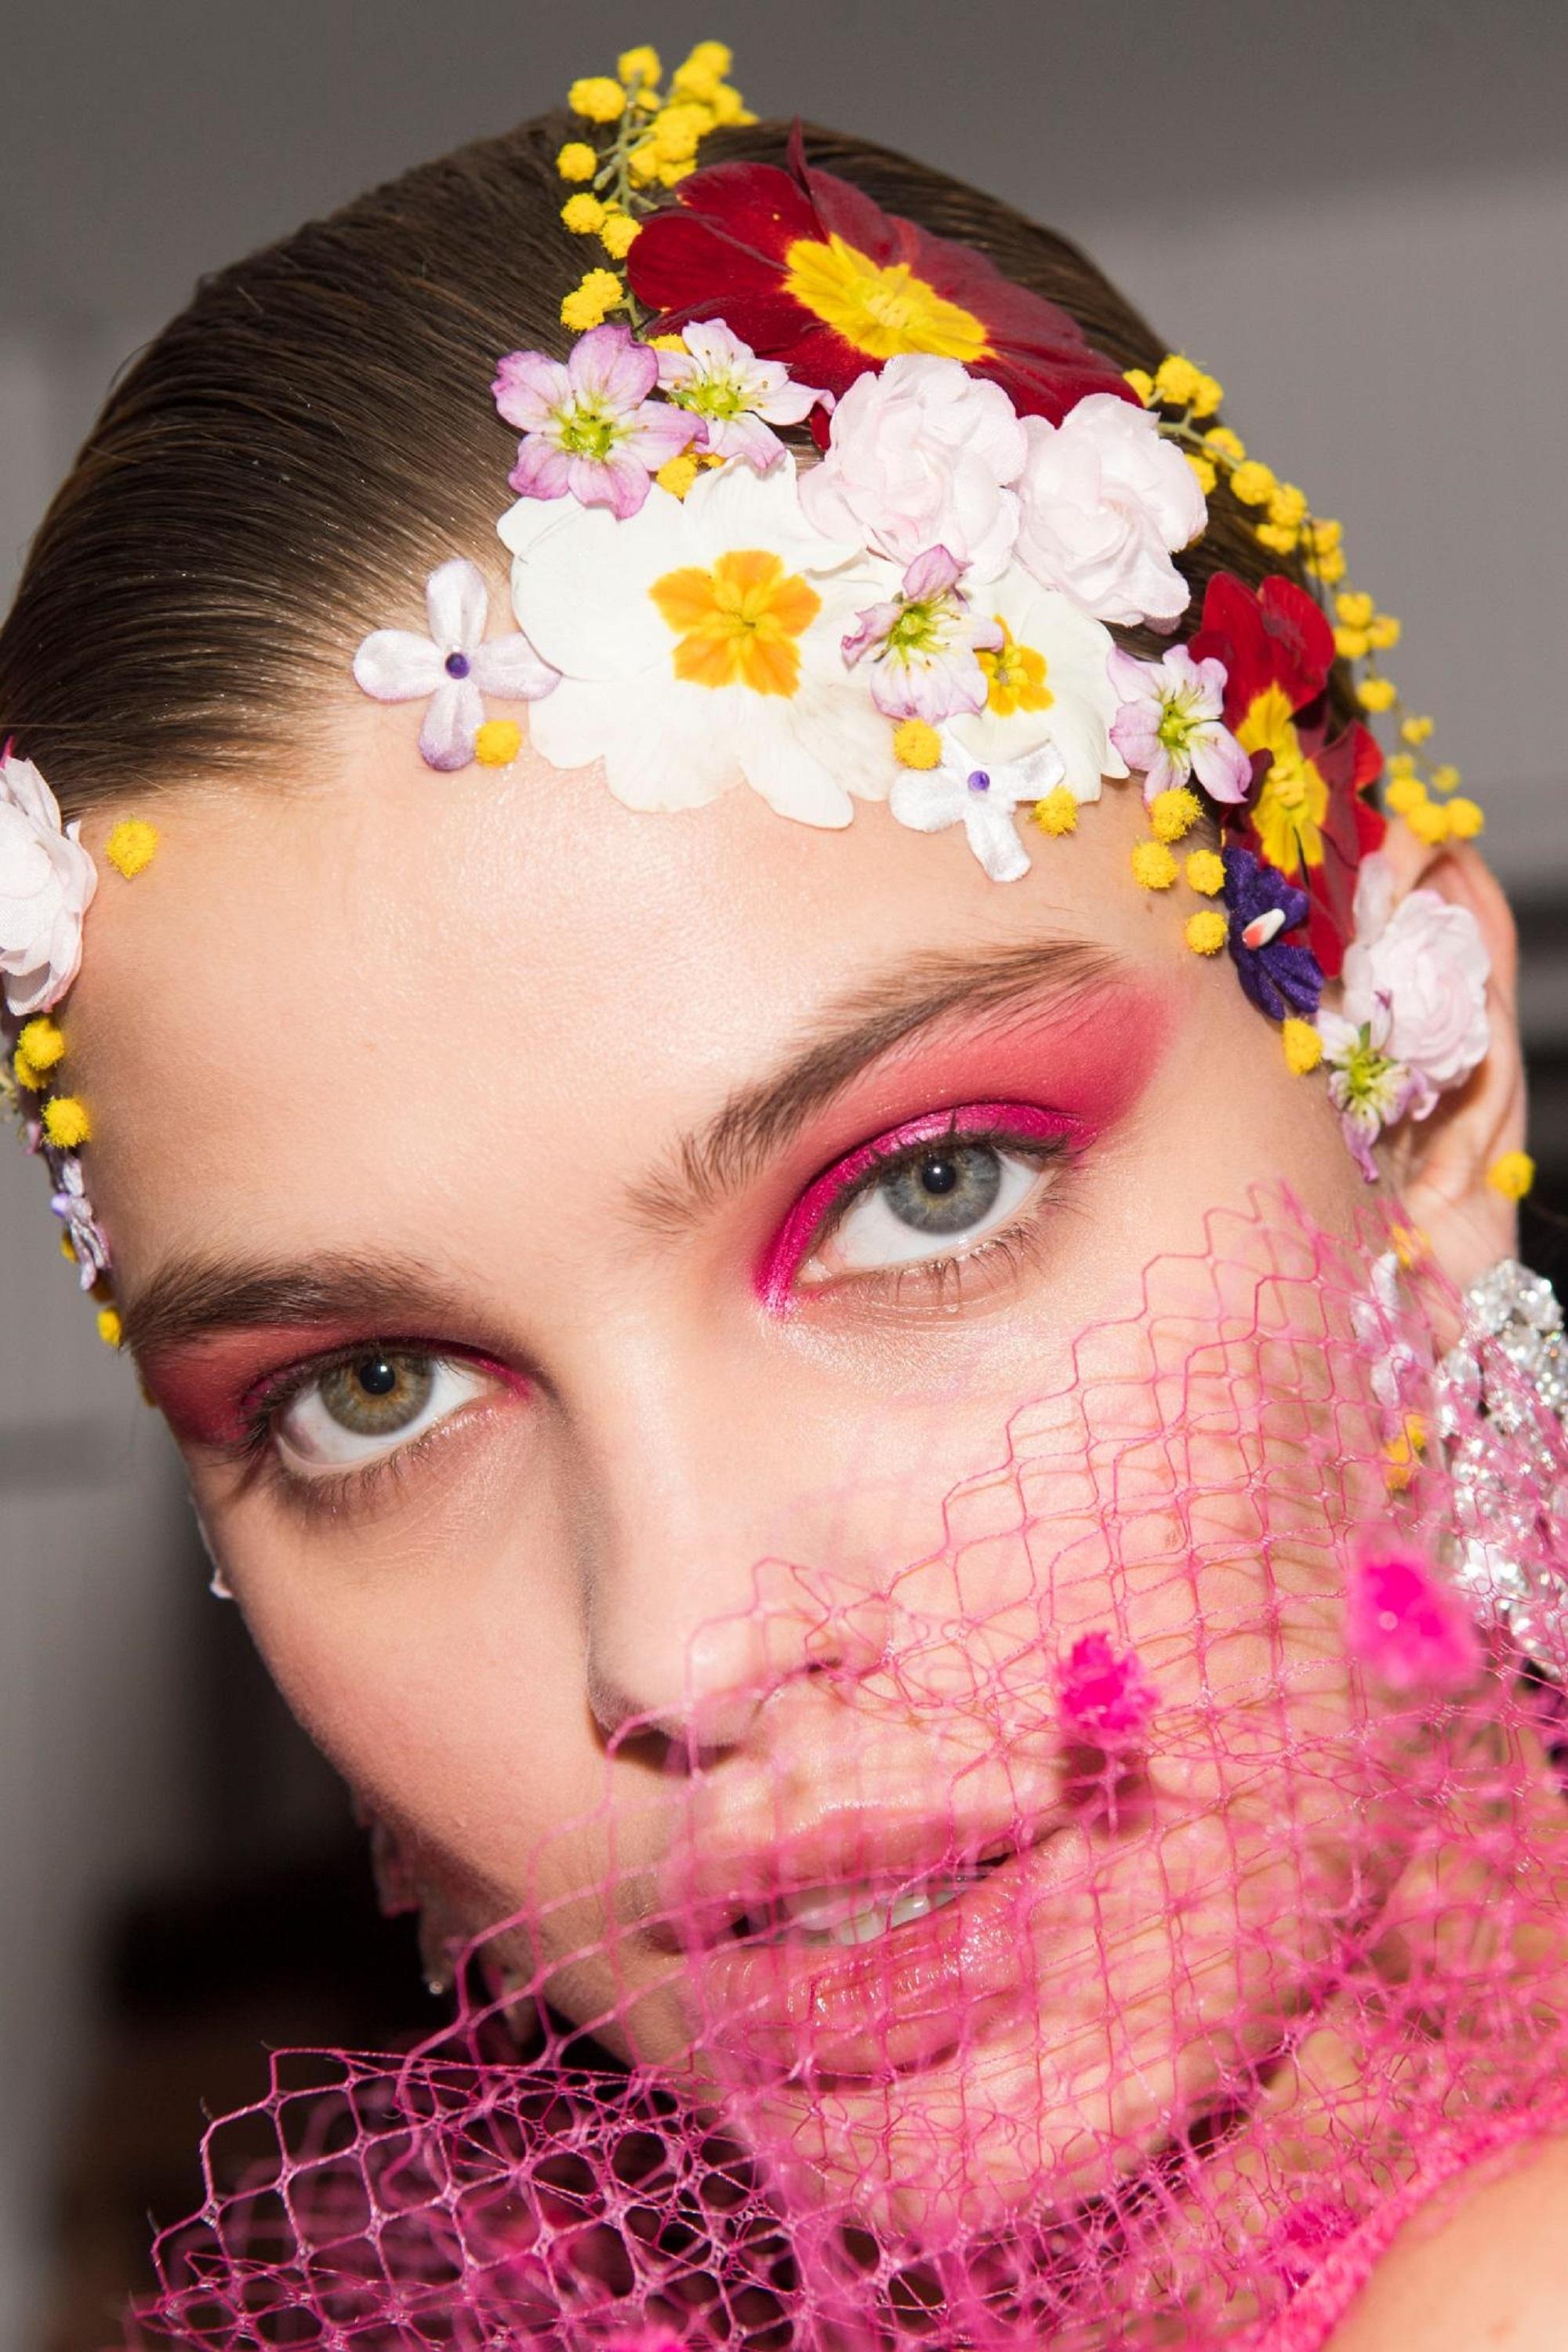 Paris Fashion Week 2019: Closeup shot of a woman with flower accessories on her hair